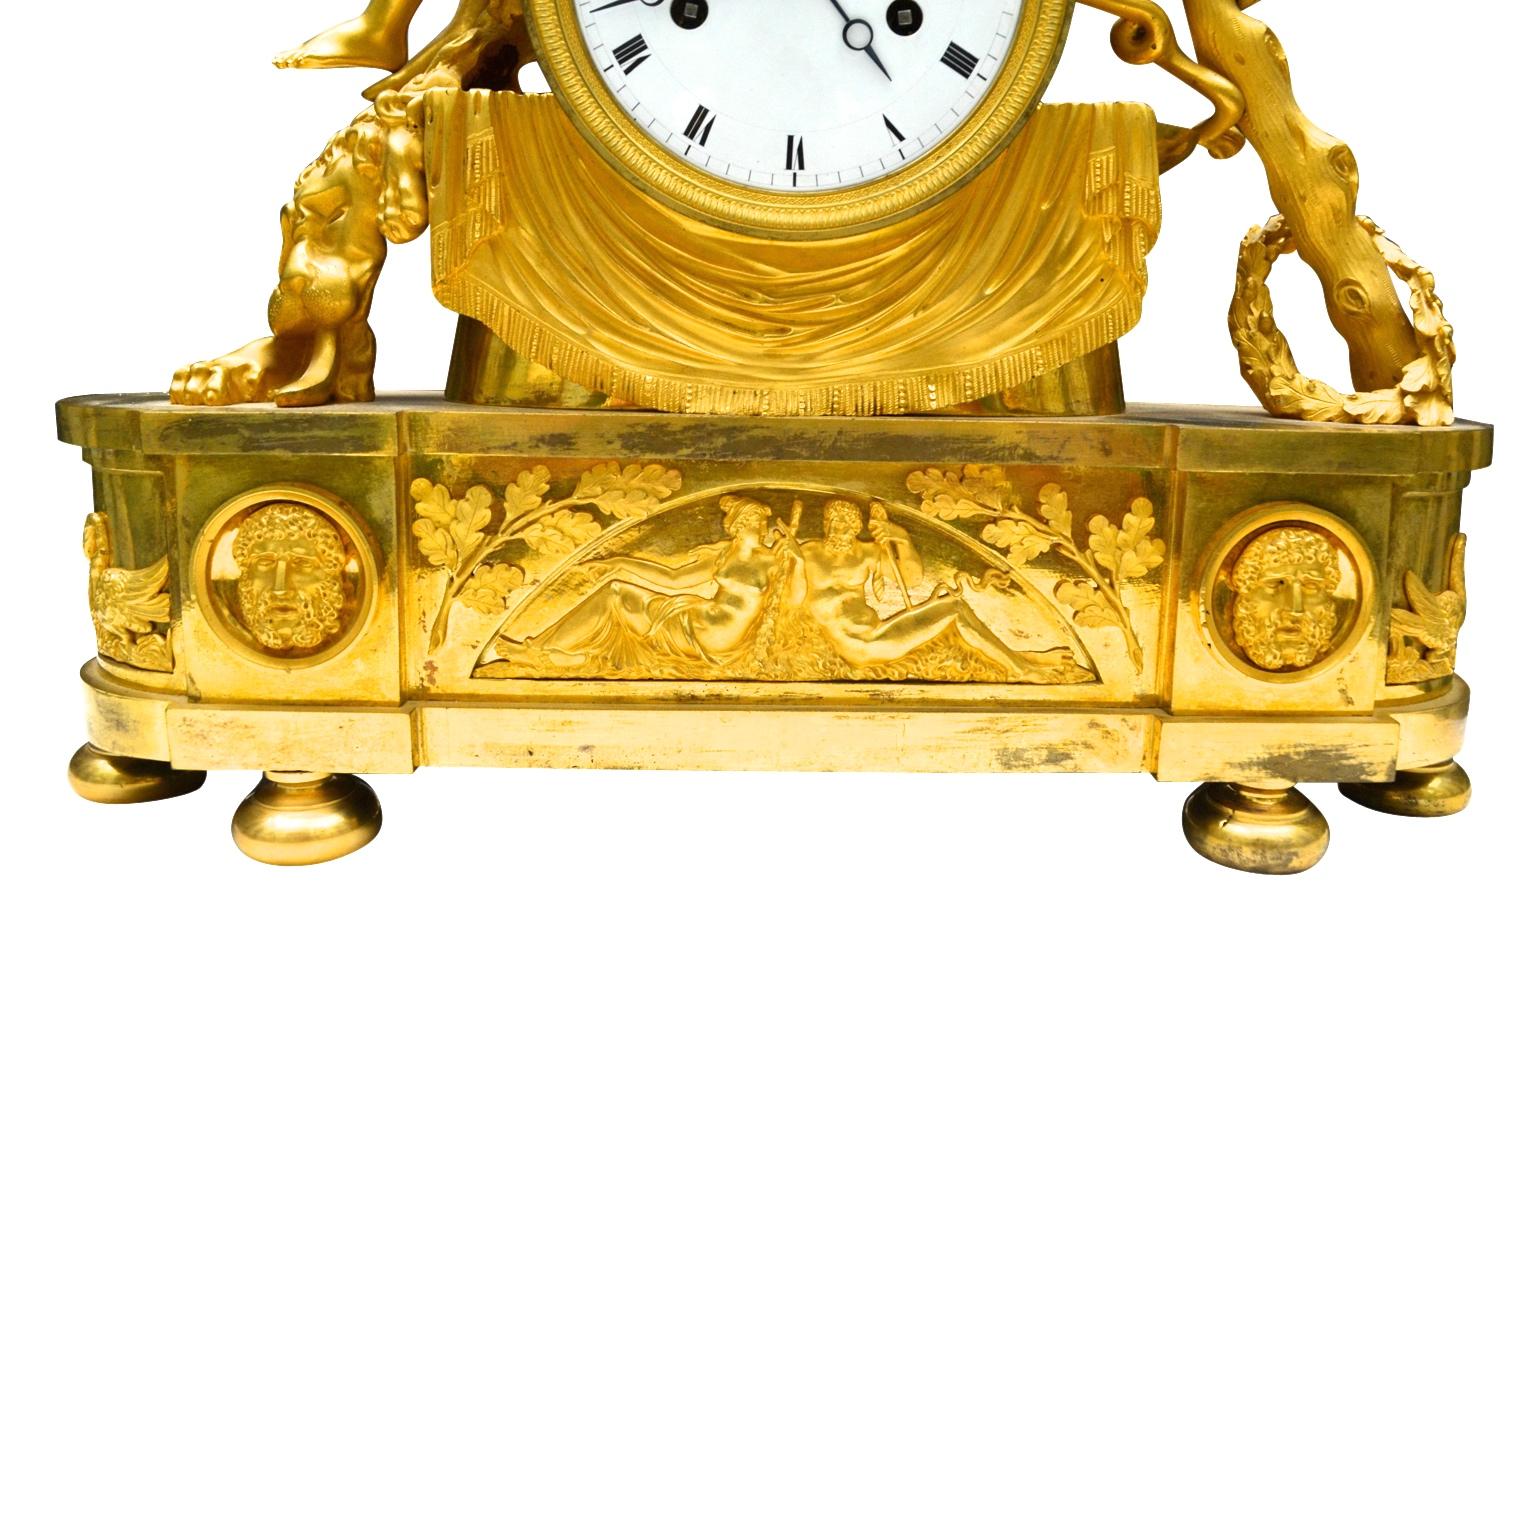  French Empire Gilt Bronze Clock Depicting the Lydian Queen Omphale For Sale 2